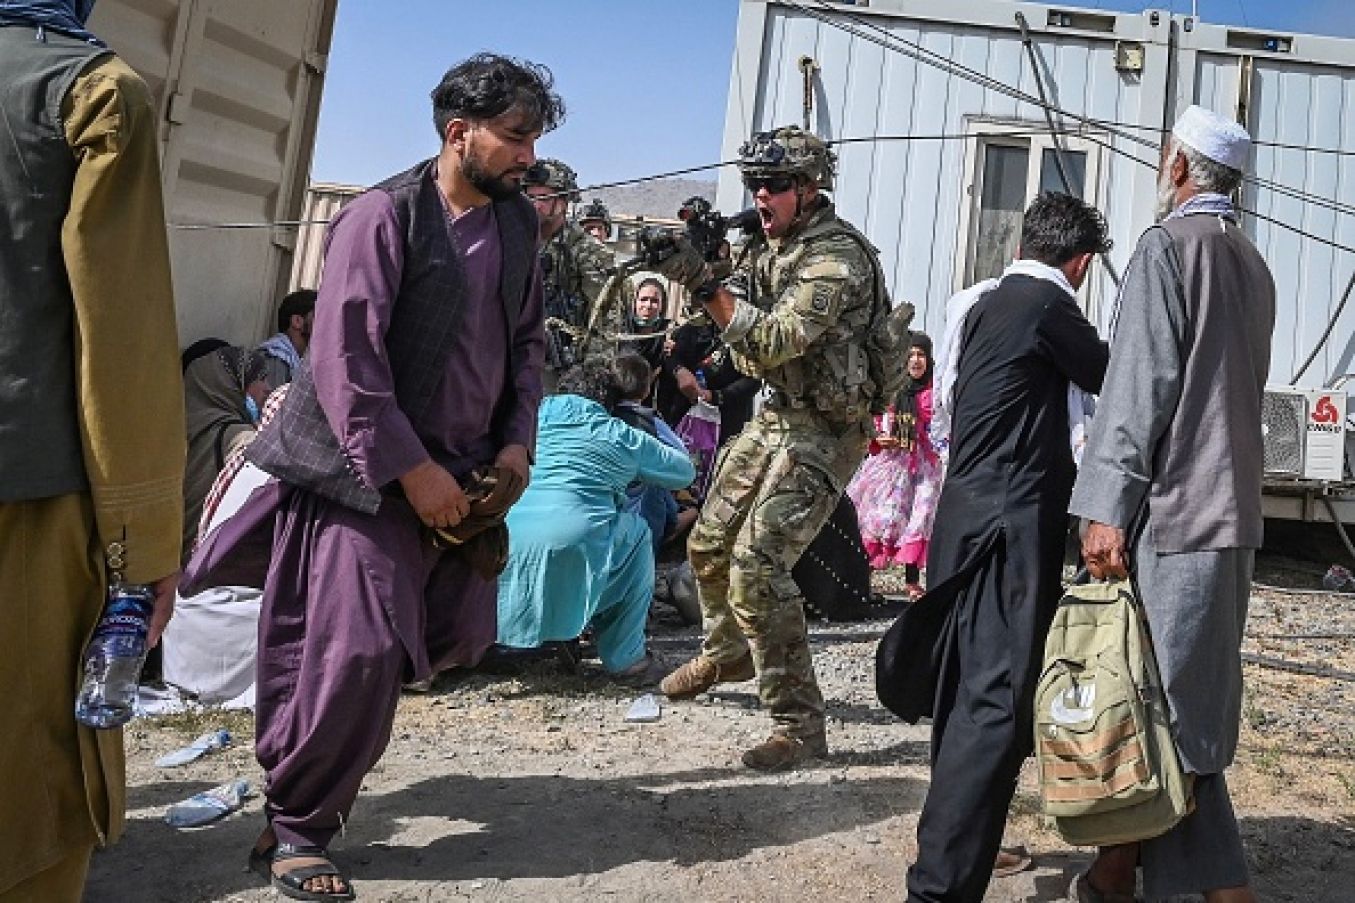 A Us Soldier (C) Point His Gun Towards An Afghan Passenger At The Kabul Airport After A Stunningly Swift End To Afghanistan's 20-Year War. Photo: Wakil Hohsar/Afp Via Getty Images